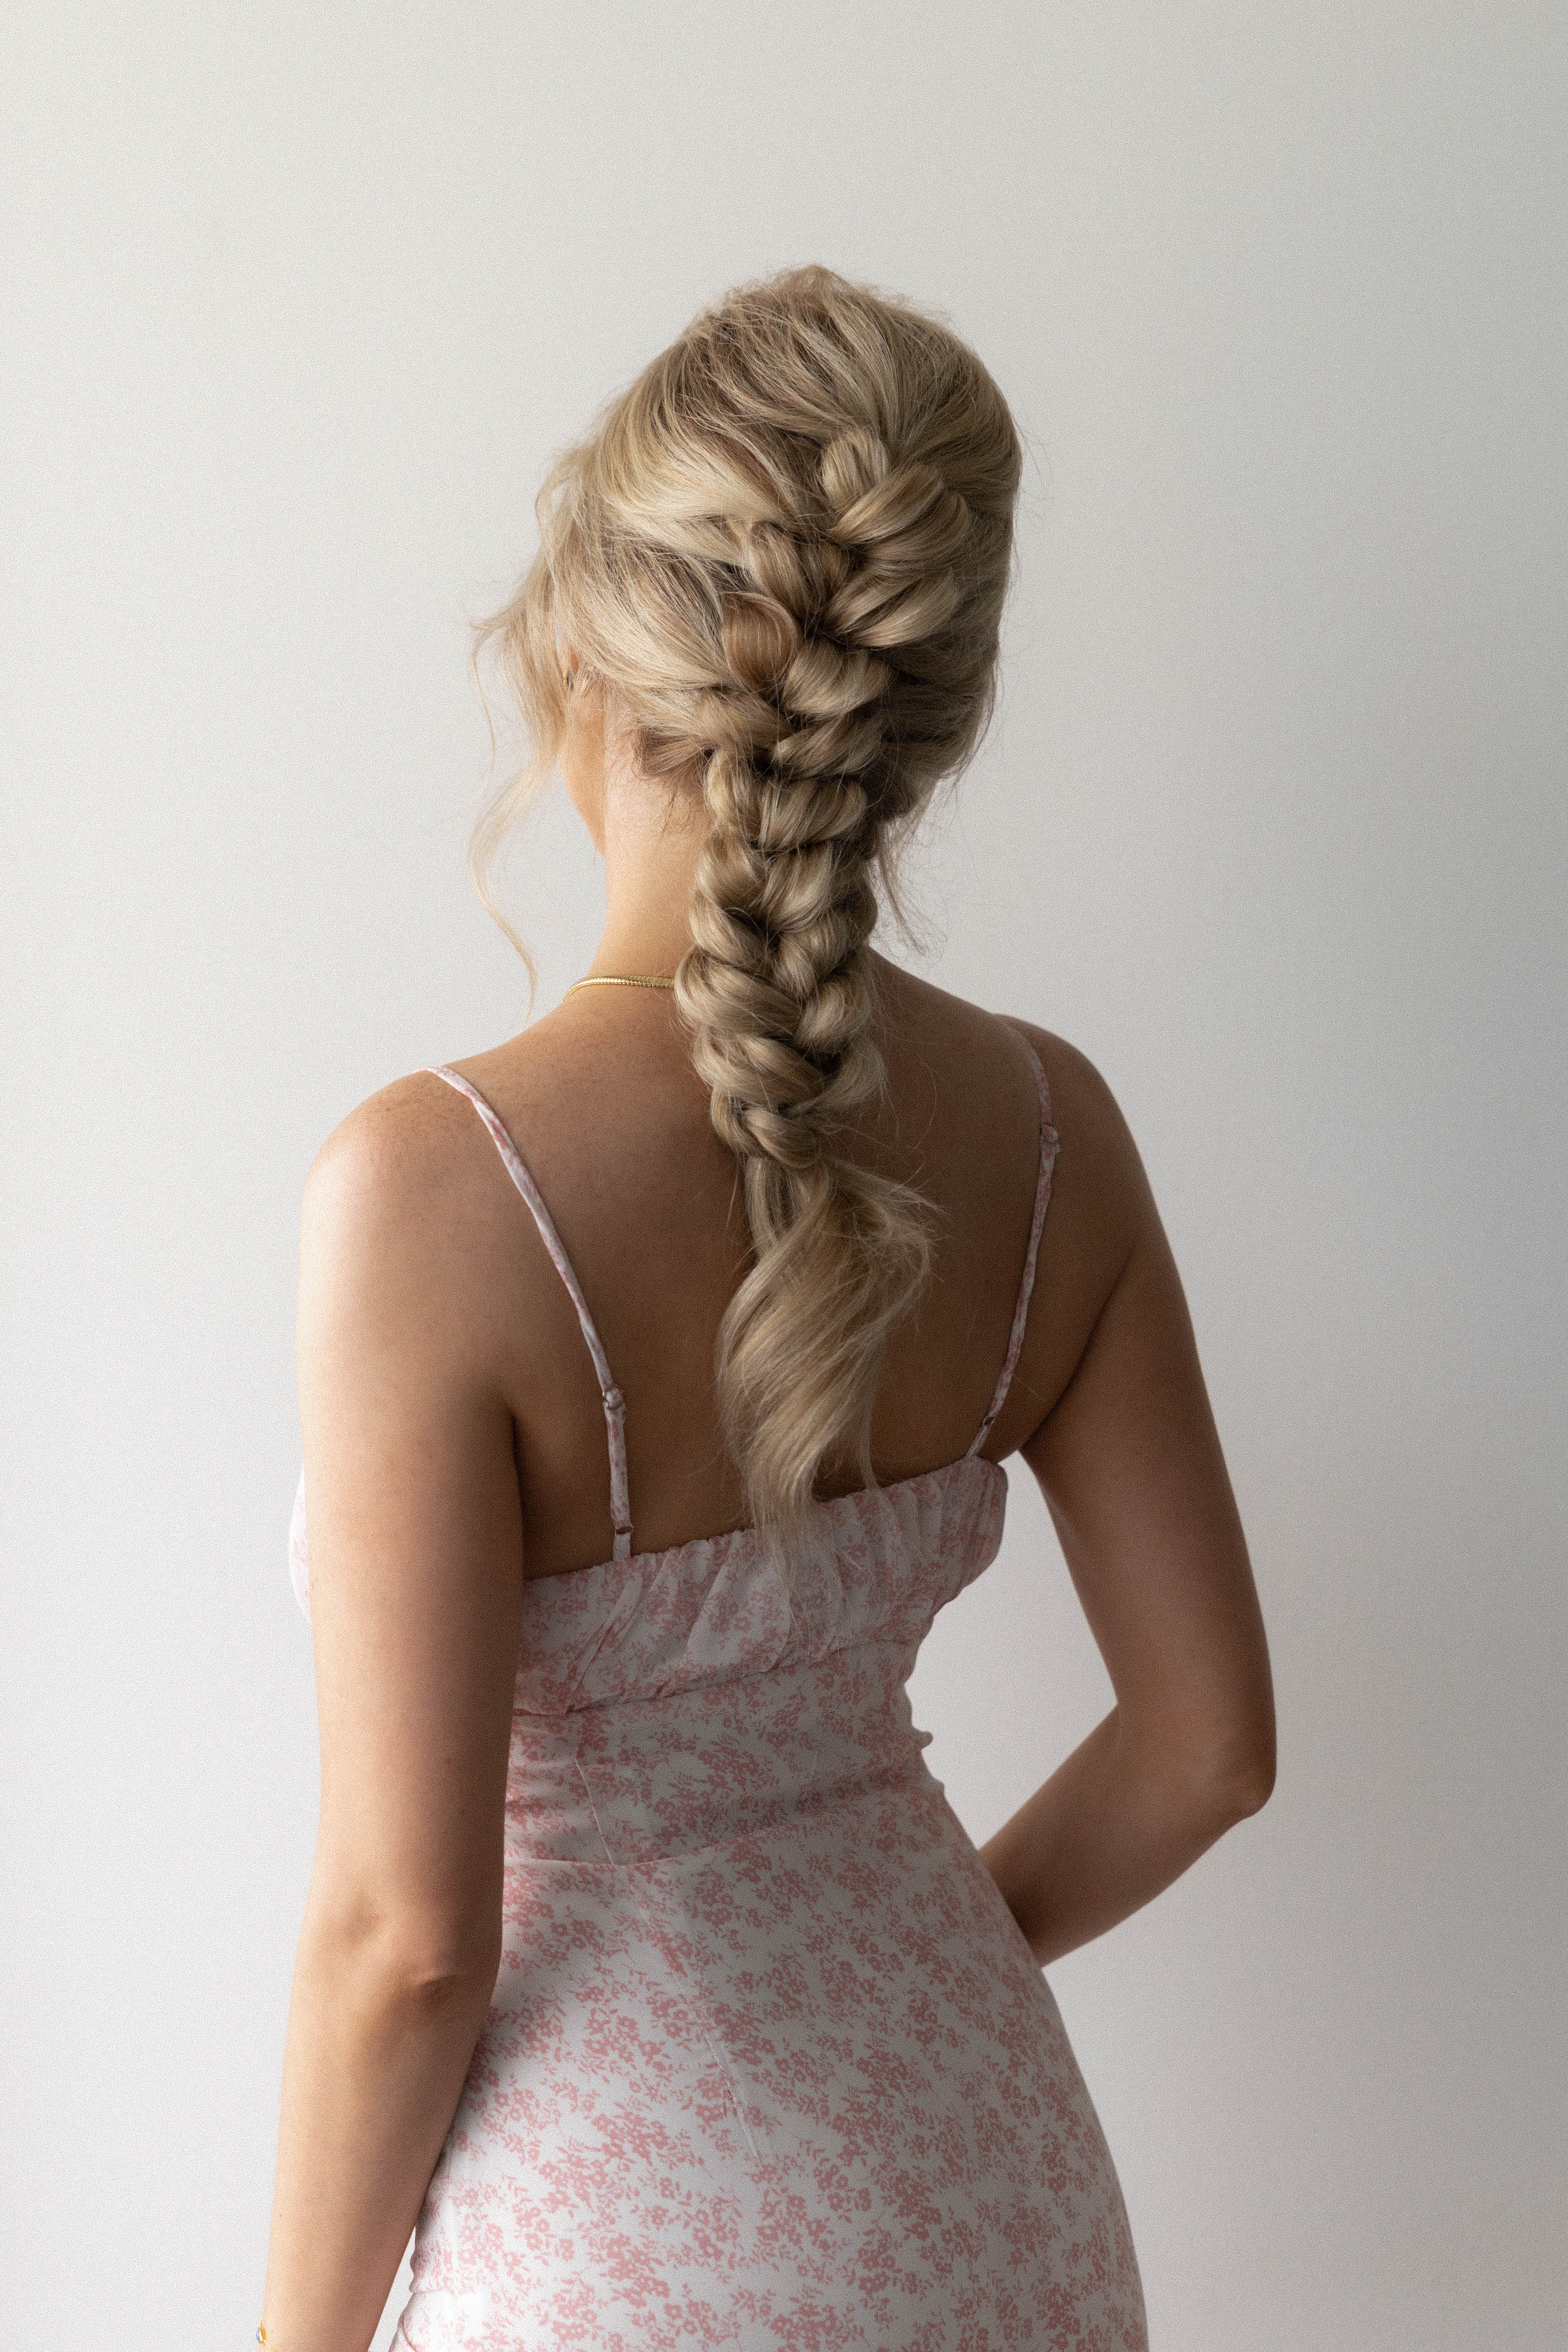 EASY BRAIDED PONYTAIL HAIRSTYLE FOR SUMMER 2021